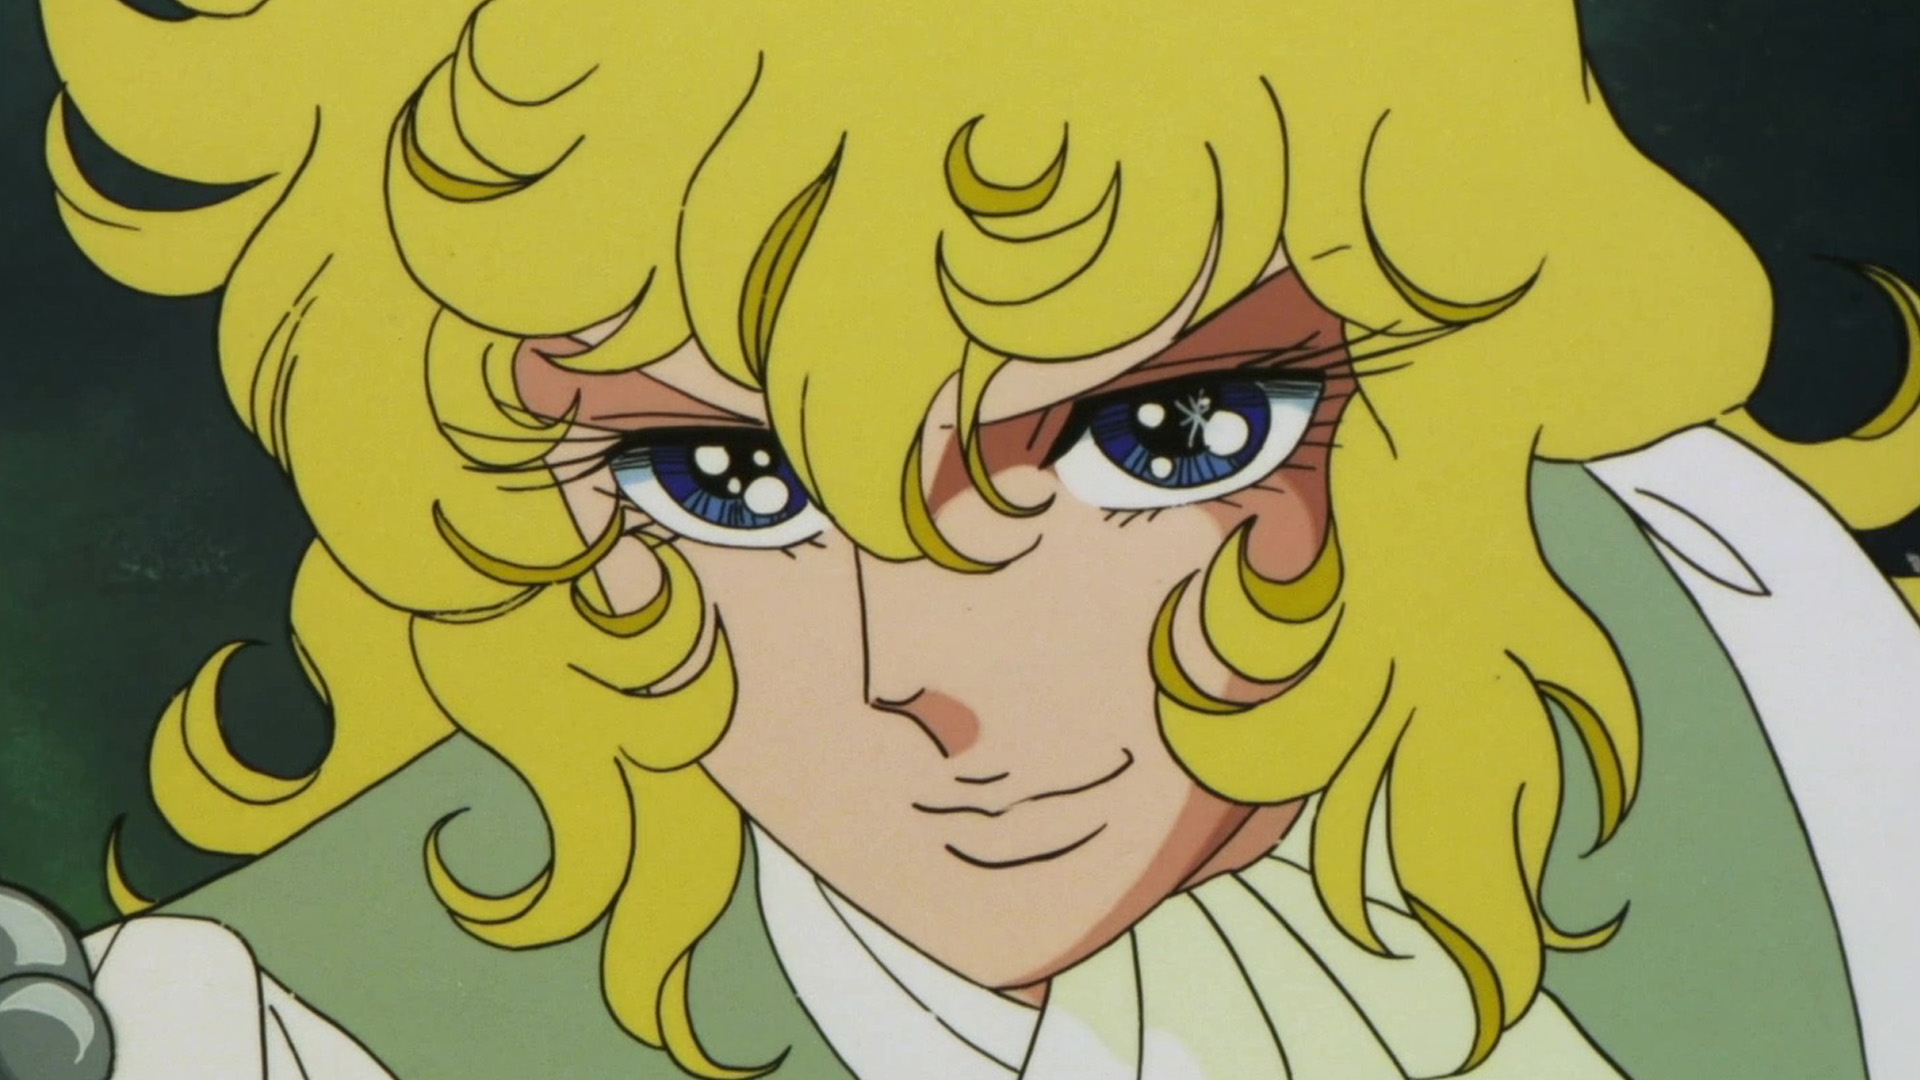 The Rose of Versailles - Wikipedia